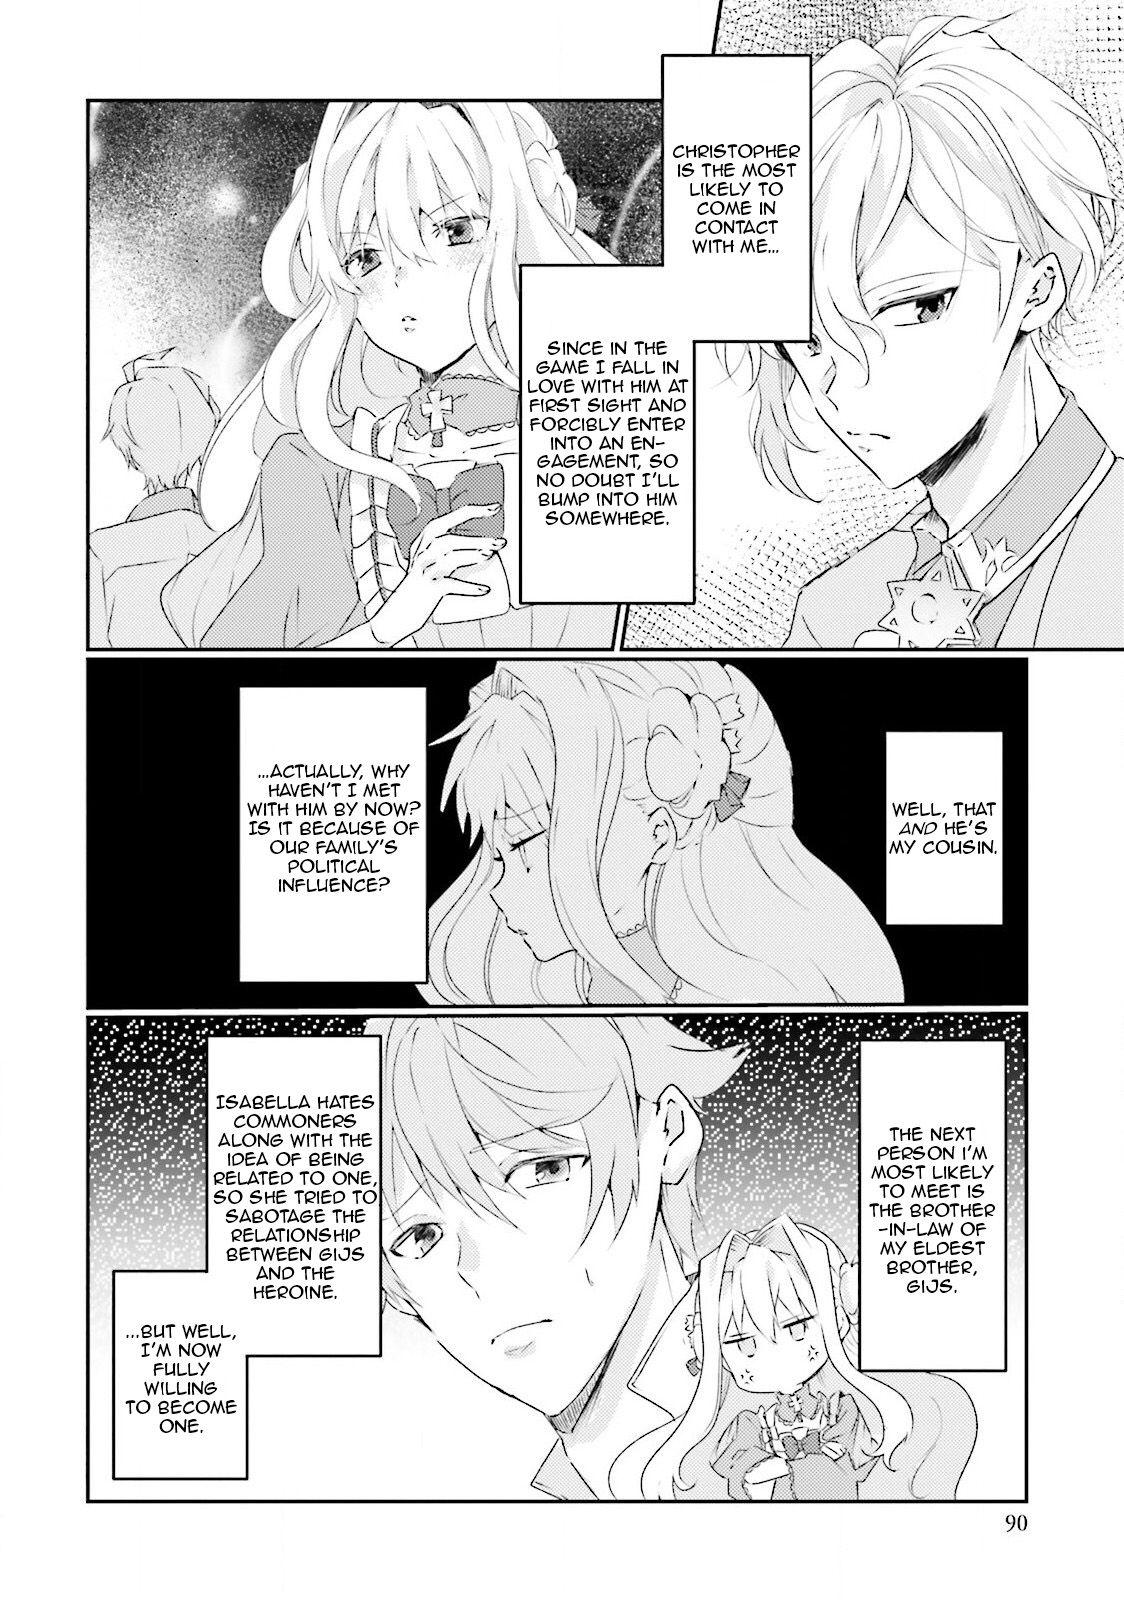 The Villainess Wants to Marry a Commoner!! Vol. 1 Ch. 3